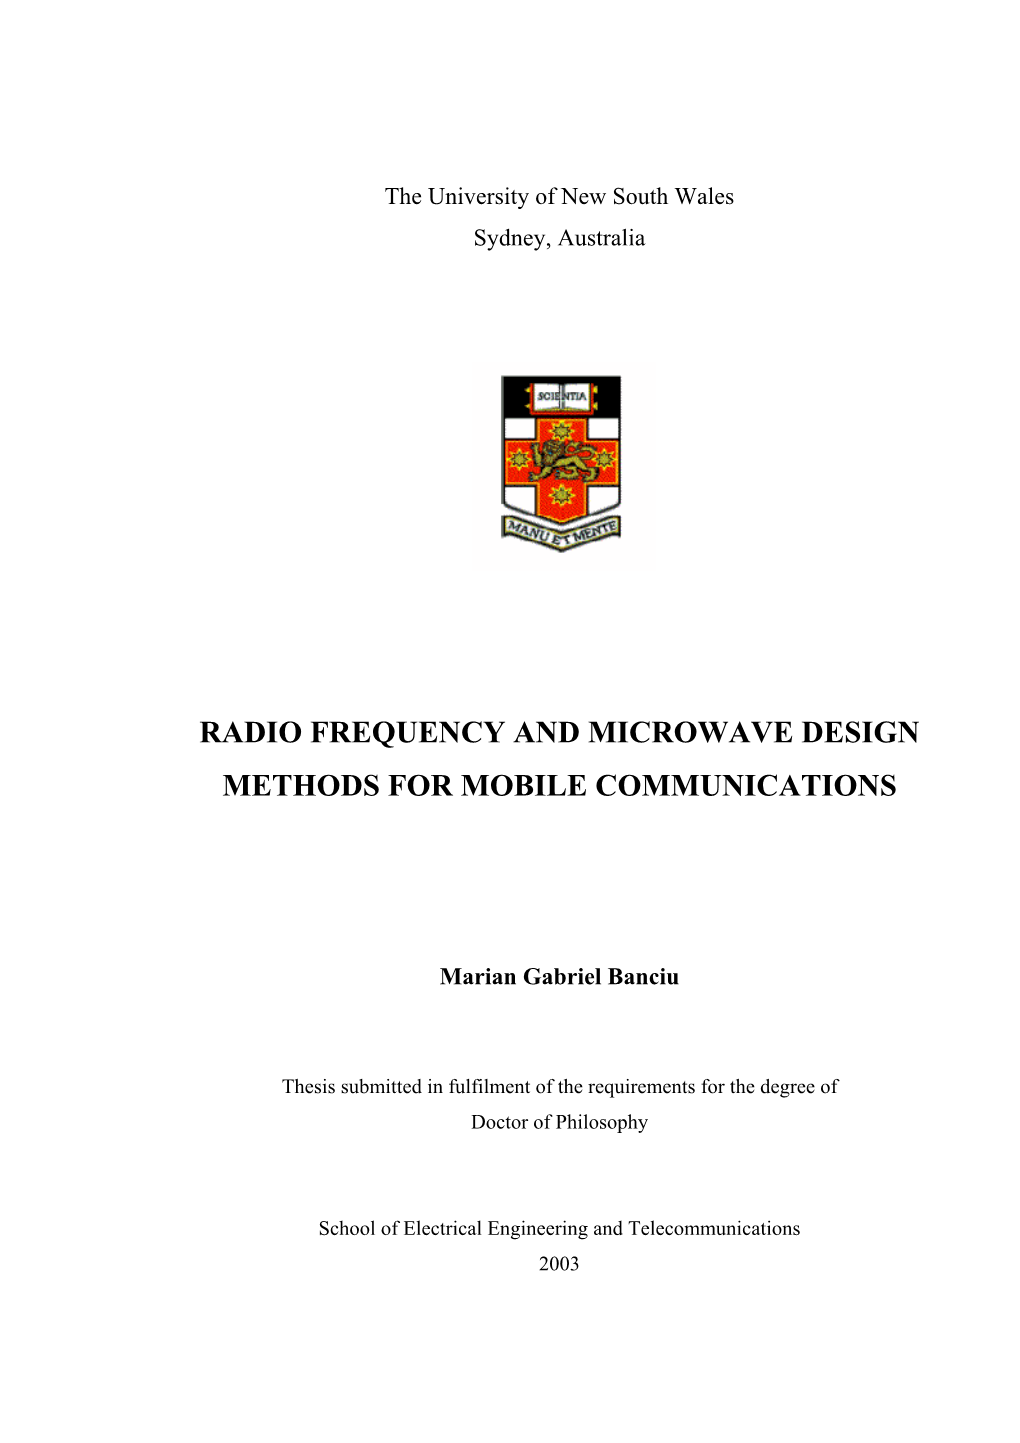 Radio Frequency and Microwave Design Methods for Mobile Communications